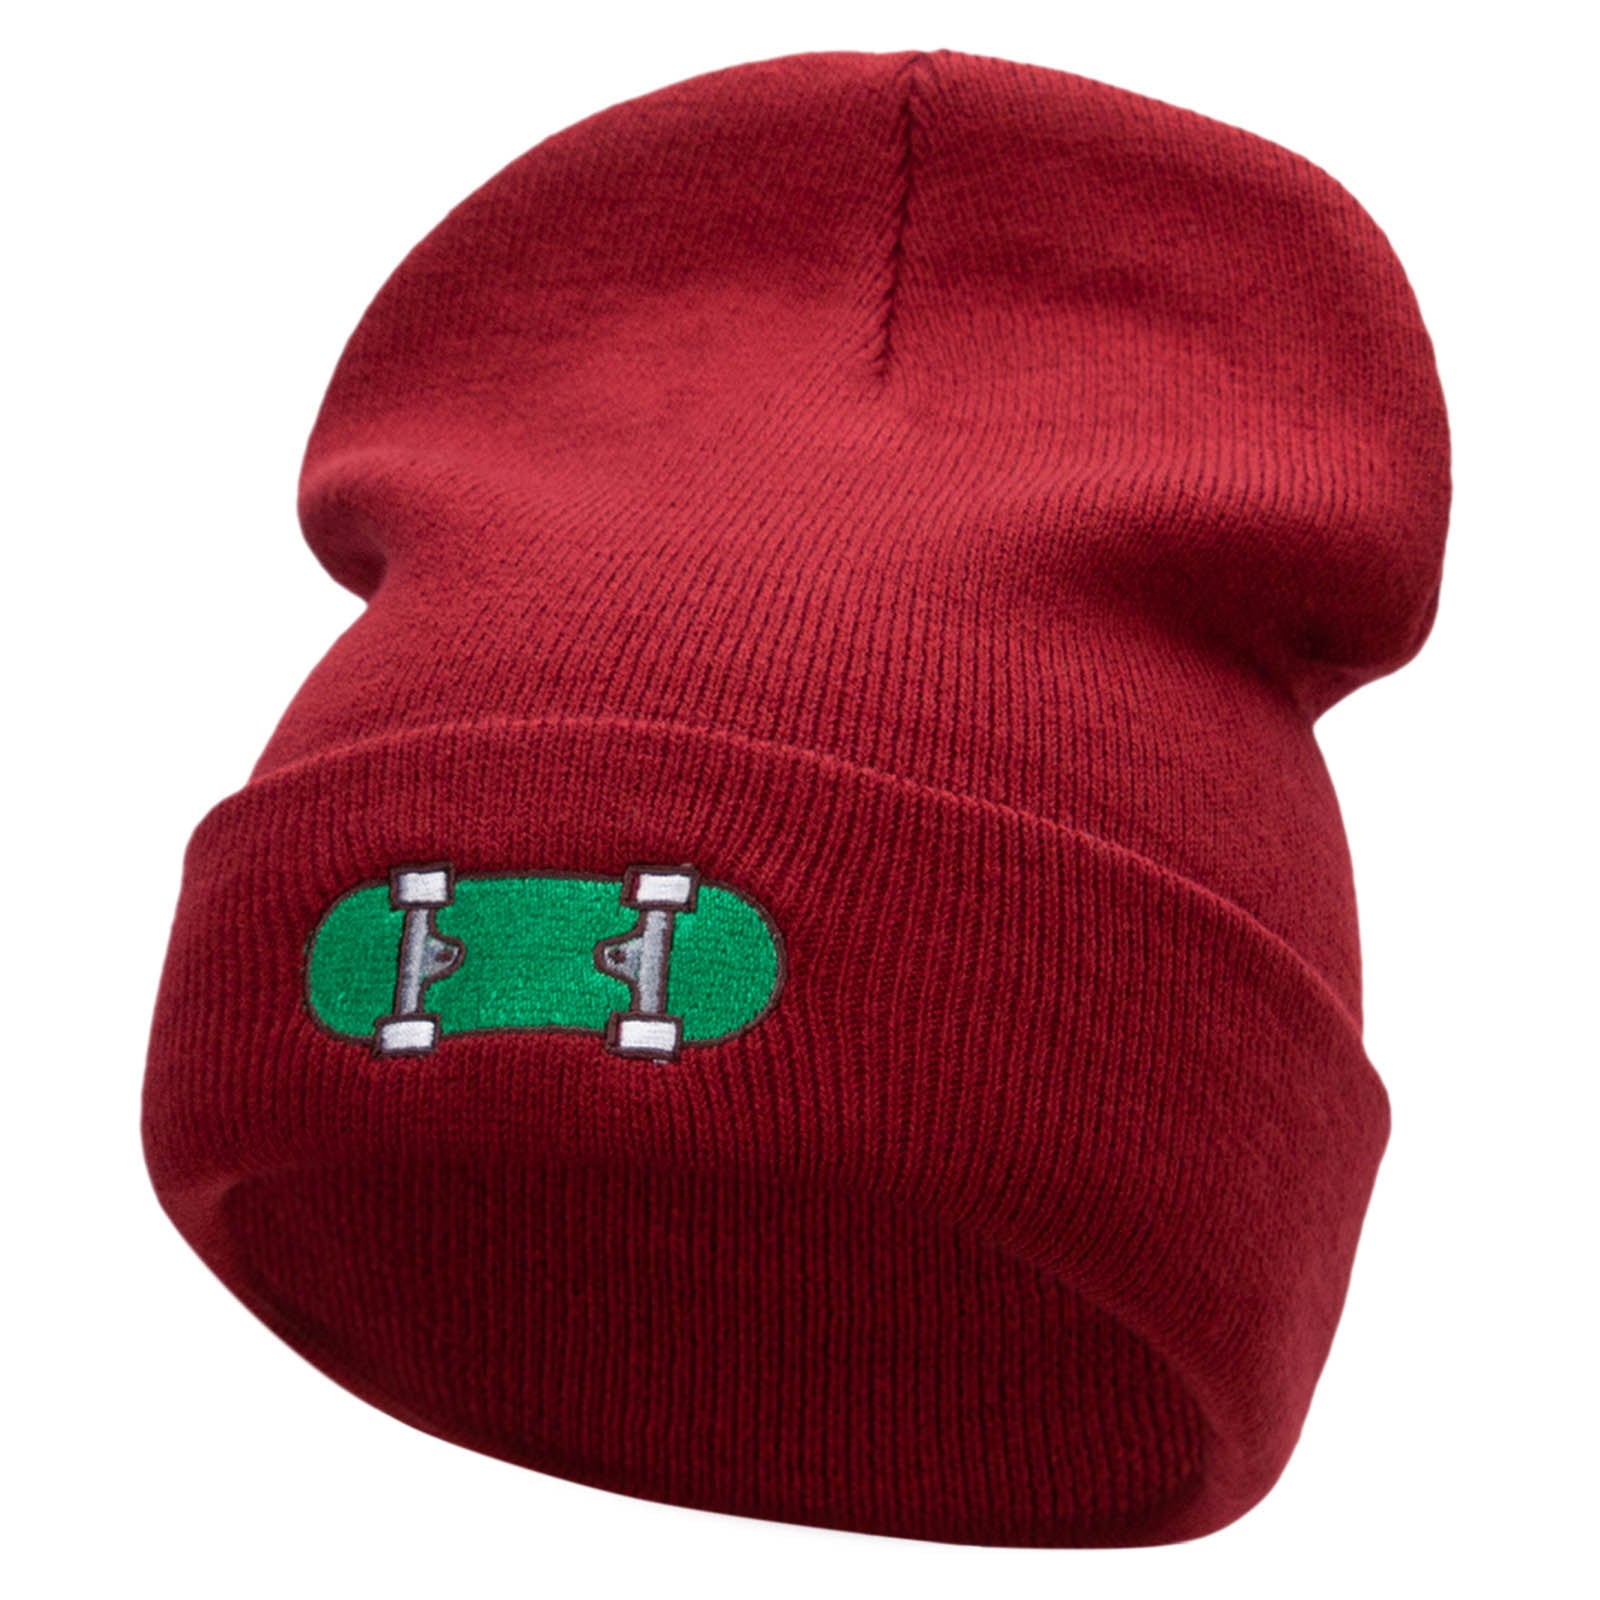 Green Skateboard Embroidered 12 Inch Long Knitted Beanie - Maroon OSFM